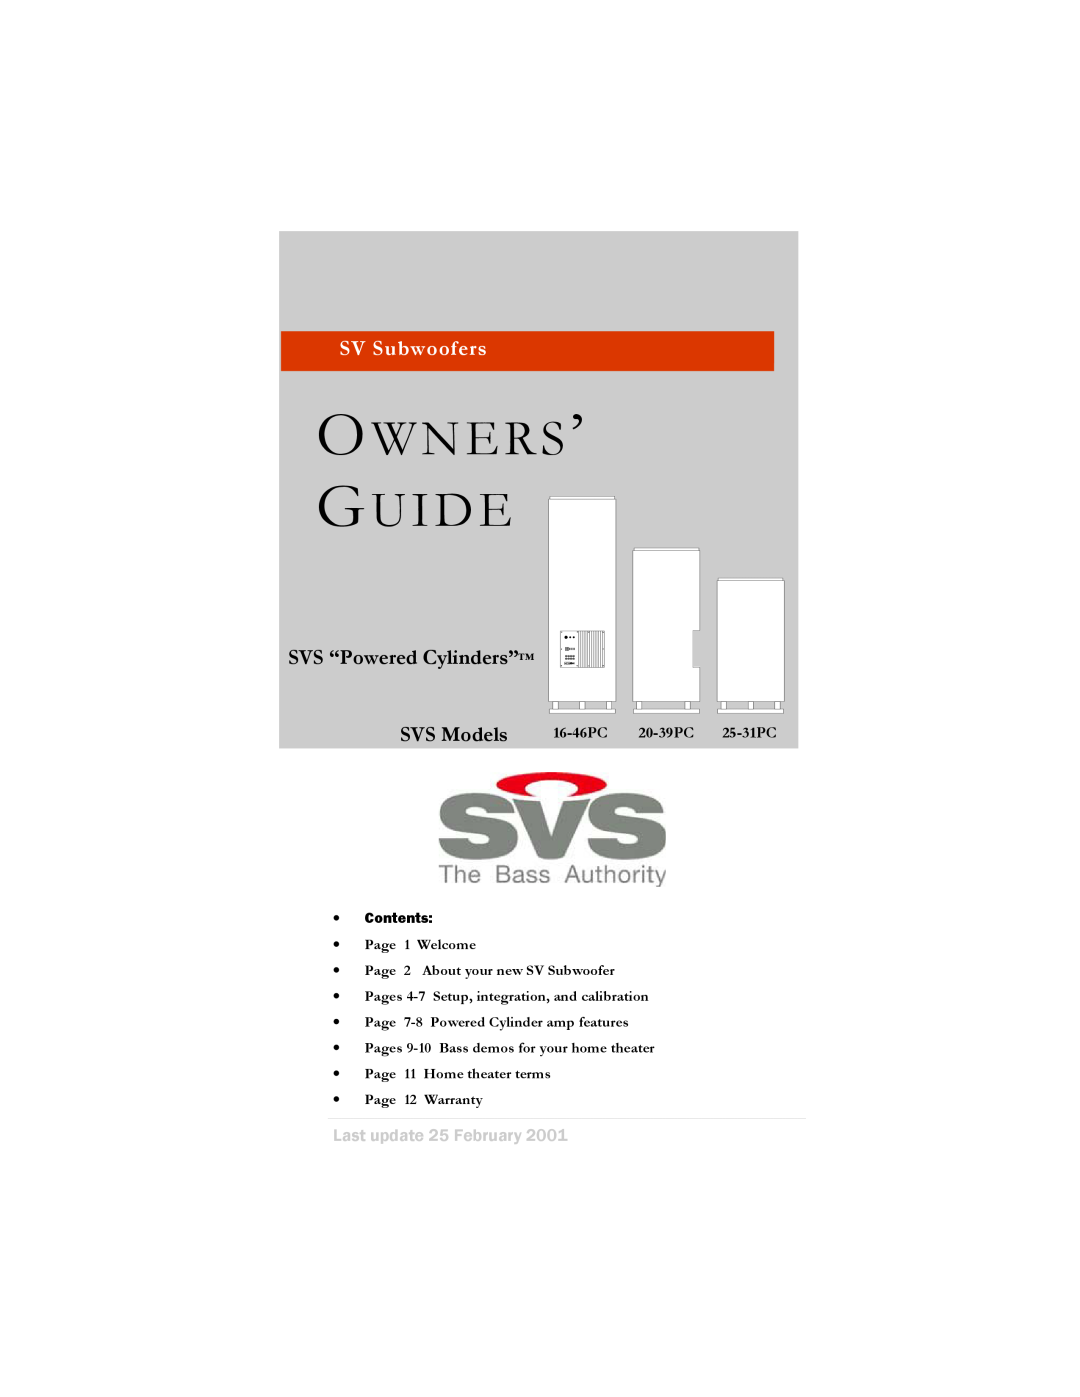 SV Sound 16-46PC warranty Owners’ Guide, SV Subwoofers, SVS “Powered Cylinders”, SVS Models, Last update 25 February 